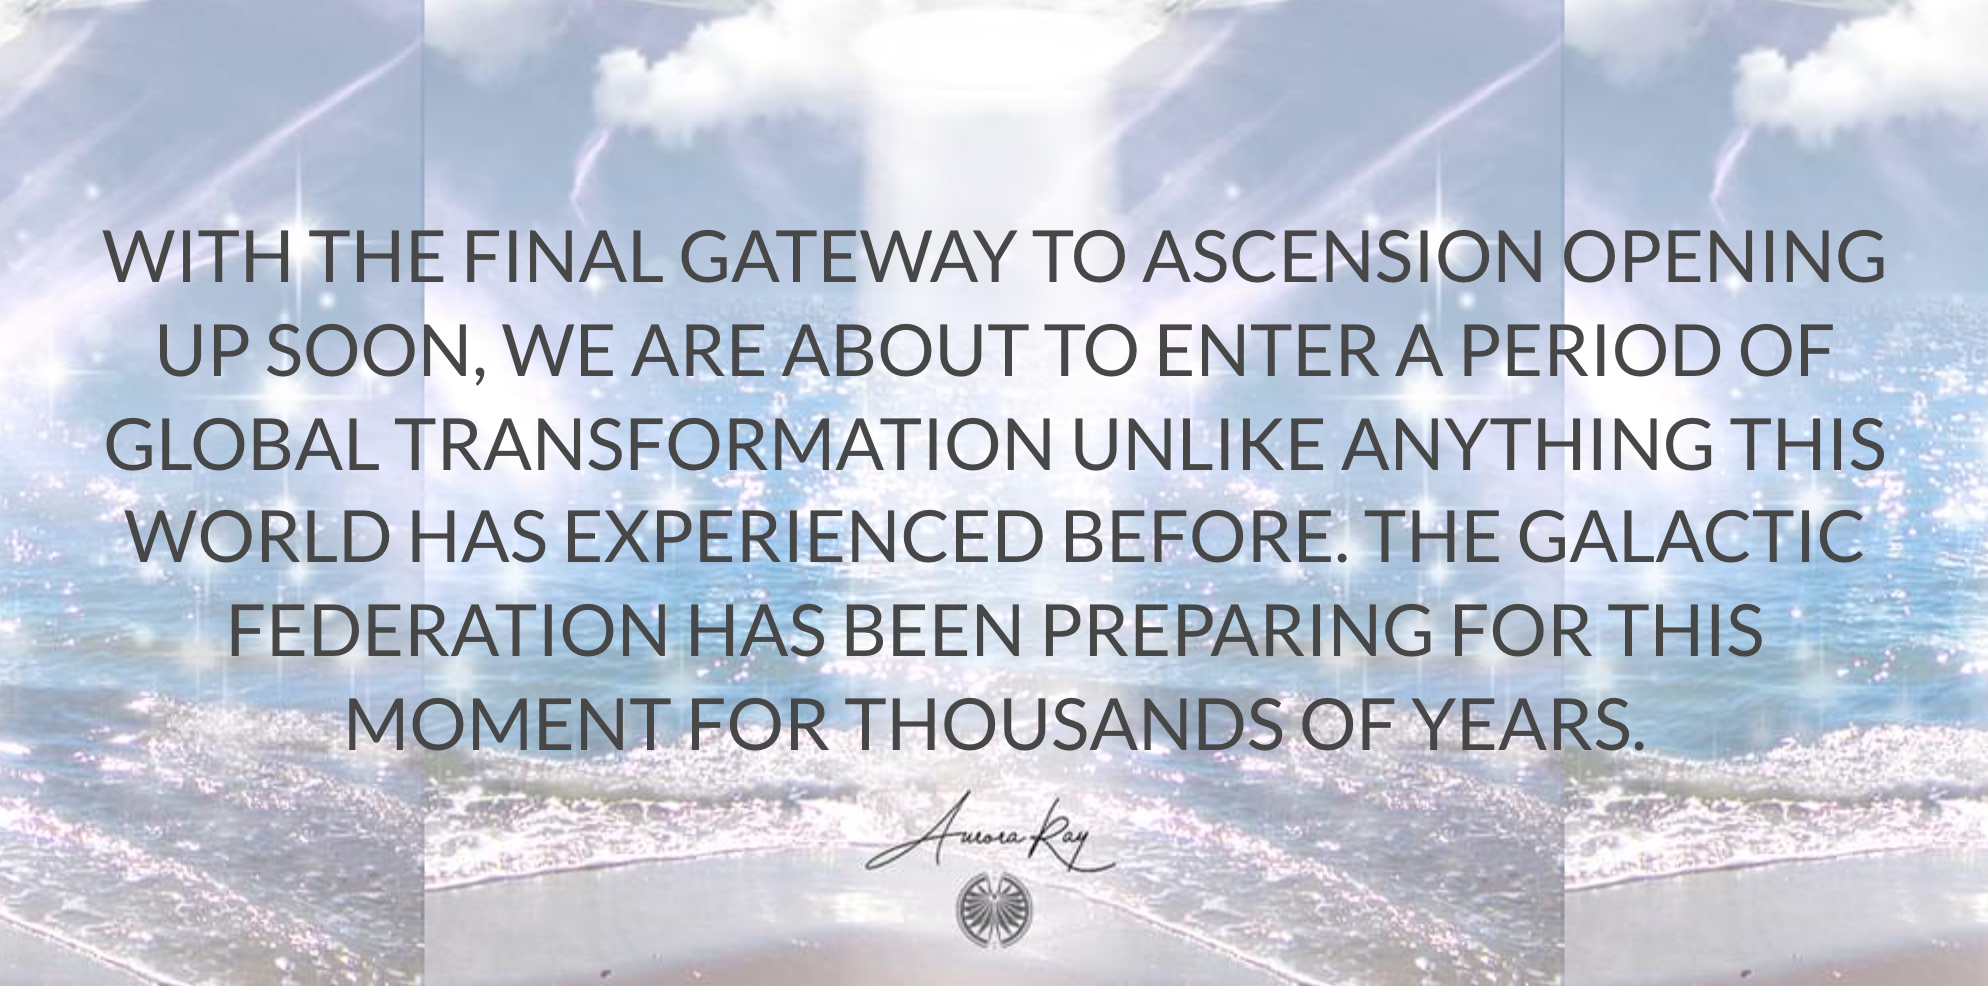 Je bekijkt nu The ascension process has already begun with many people around the world.